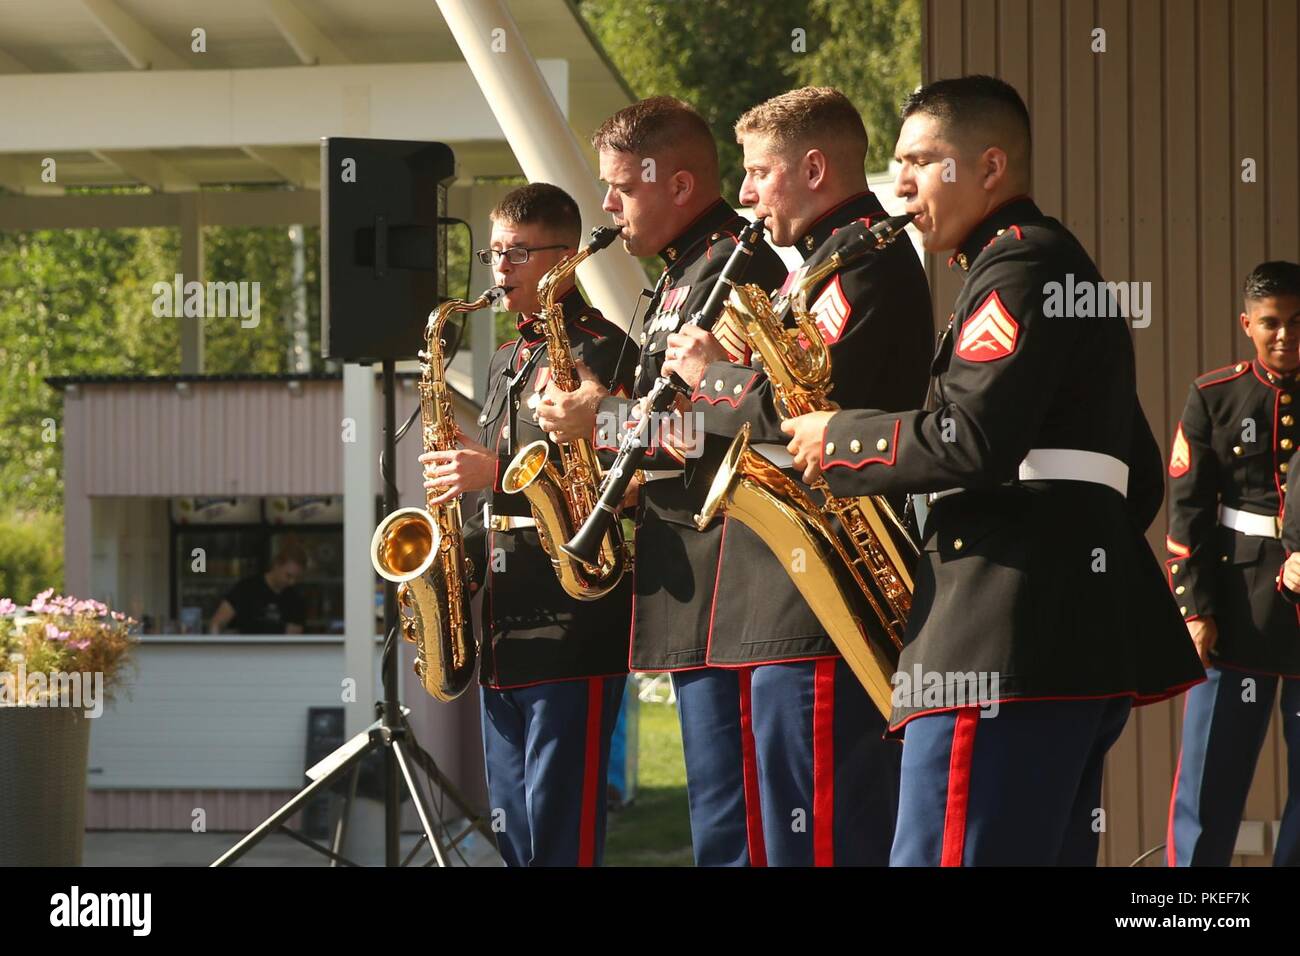 U.S. Marines with the Marine Corps Base Quantico band perform during a concert at Kesaheina, Mantyharju, Finland, July 29, 2018. The band continues to perform at different locations around Finland as they prepare for the 2018 Hamina Tattoo. Stock Photo